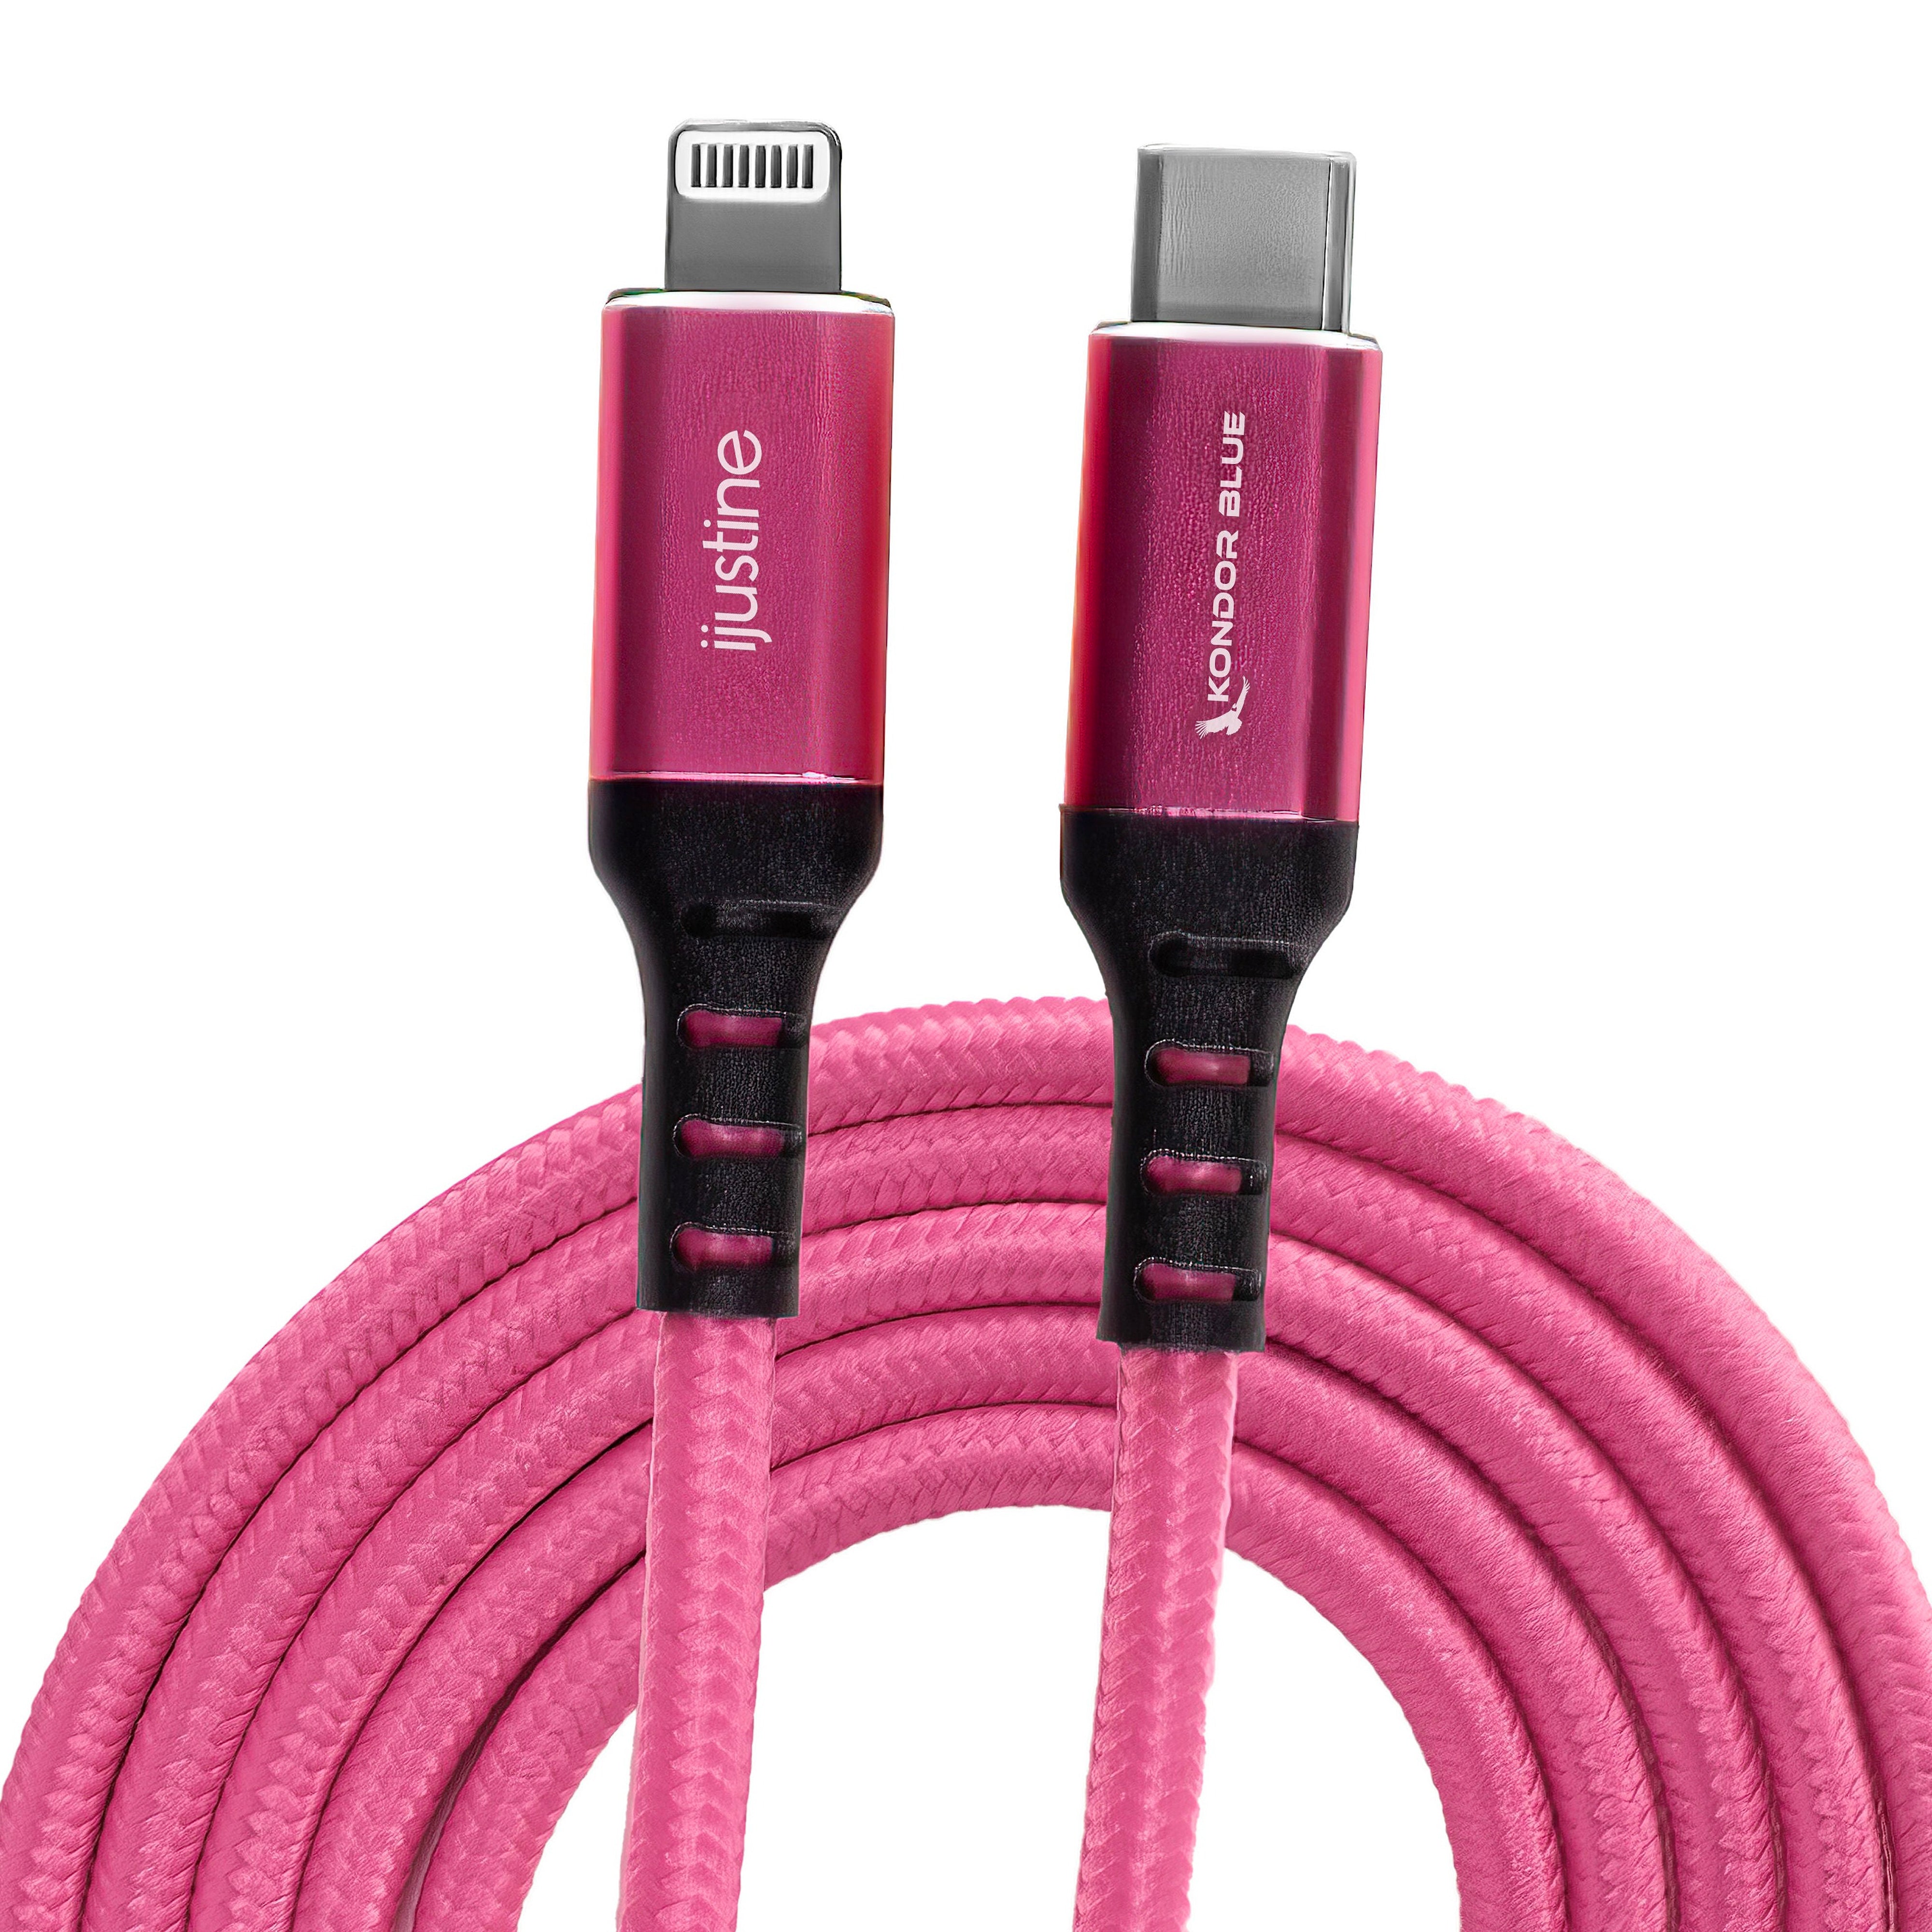 iJustine Pink Lightning Cable for iPhone Charging & Sync USB-C